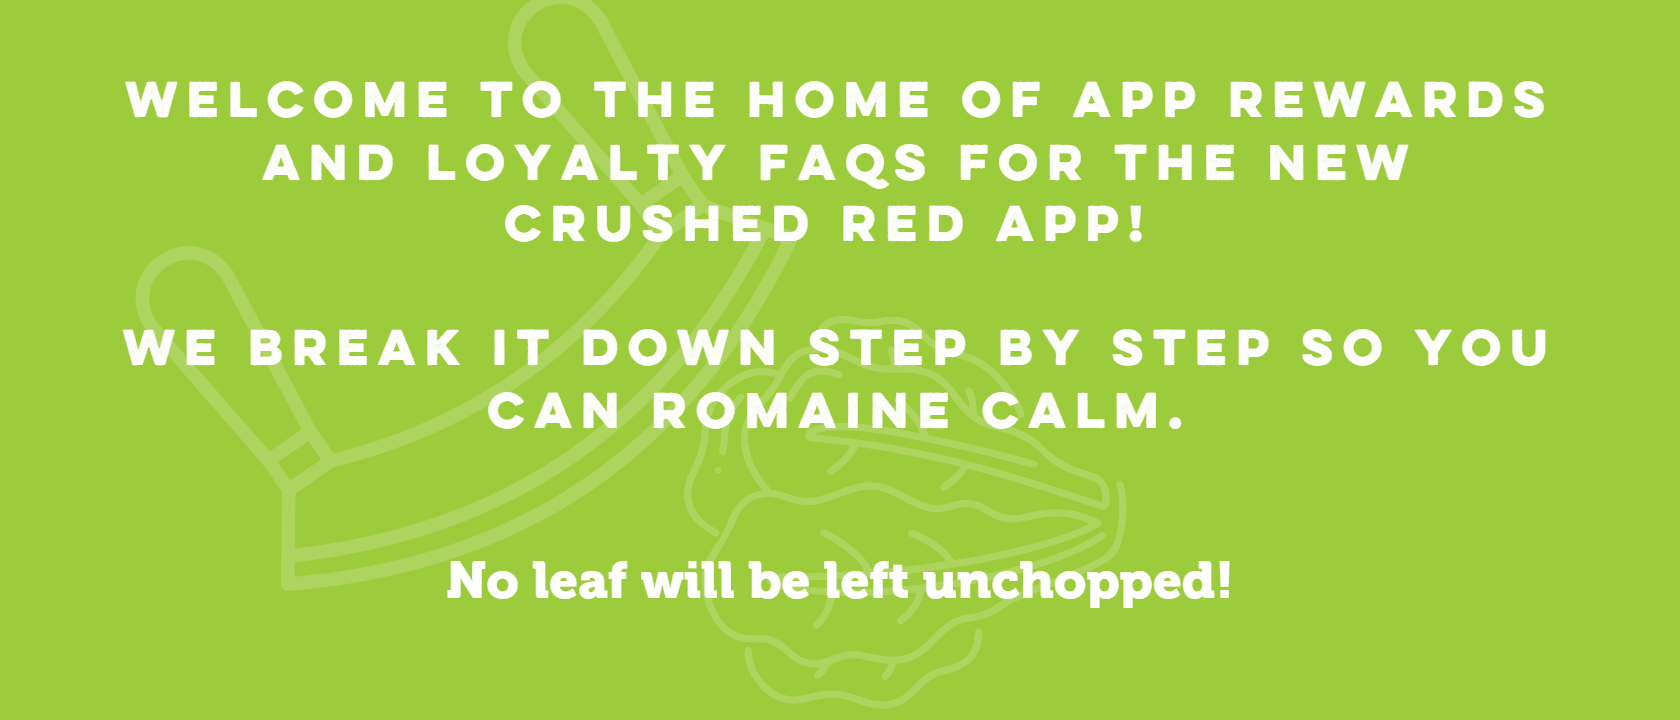 WELCOME TO THE HOME OF THE APP REWARDS AND LOYALTY FAQS FOR THE NEW CRUSHED RED APP